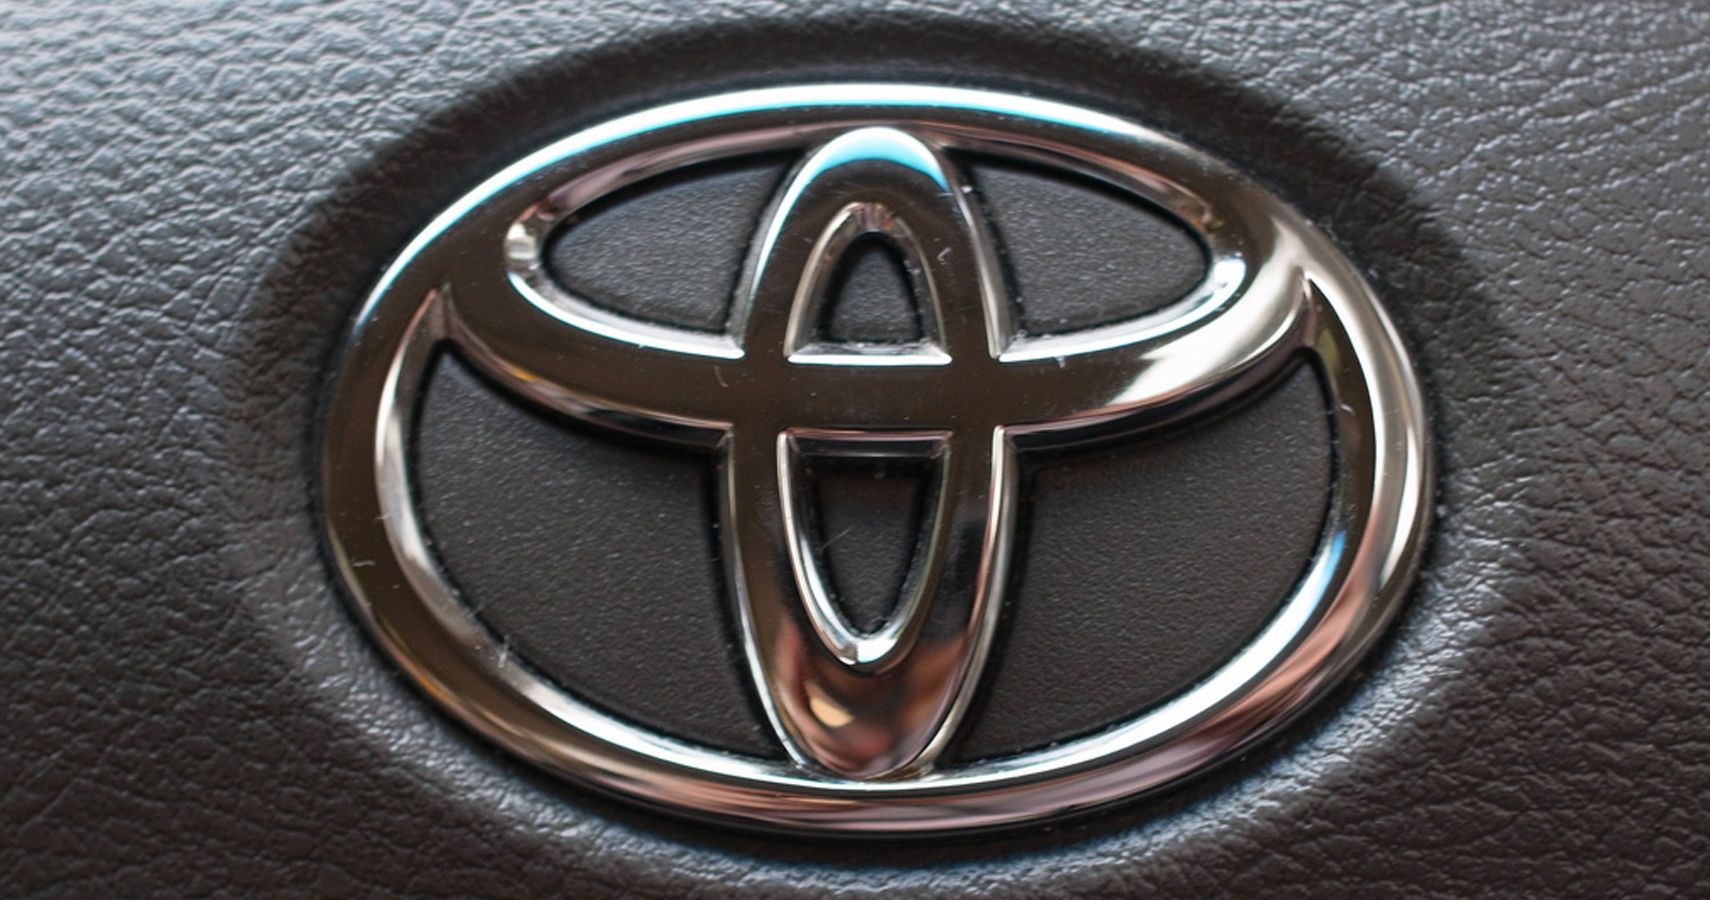 Toyota Recalls 2.4 Million Cars For Stalling Issues